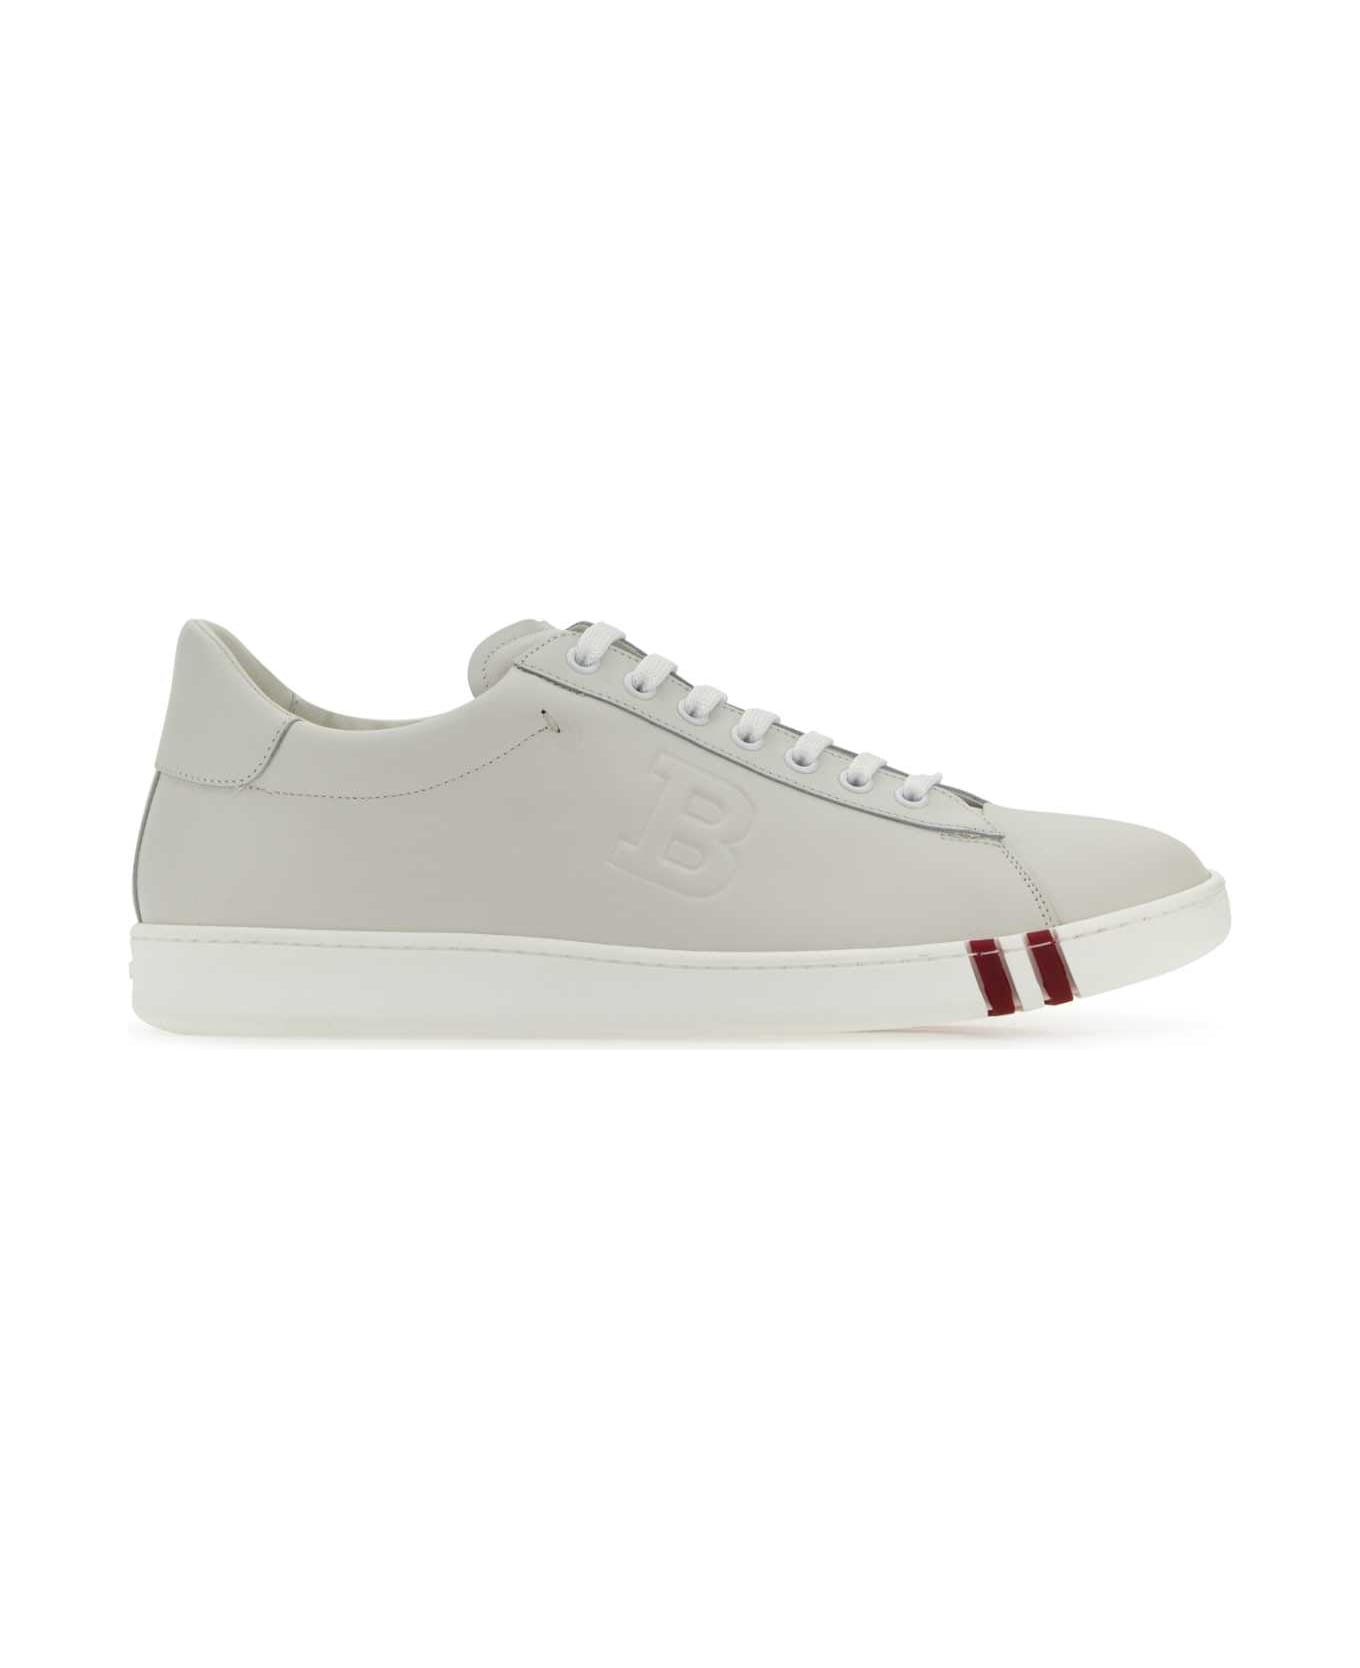 Bally Chalk Leather Asher Sneakers - F607